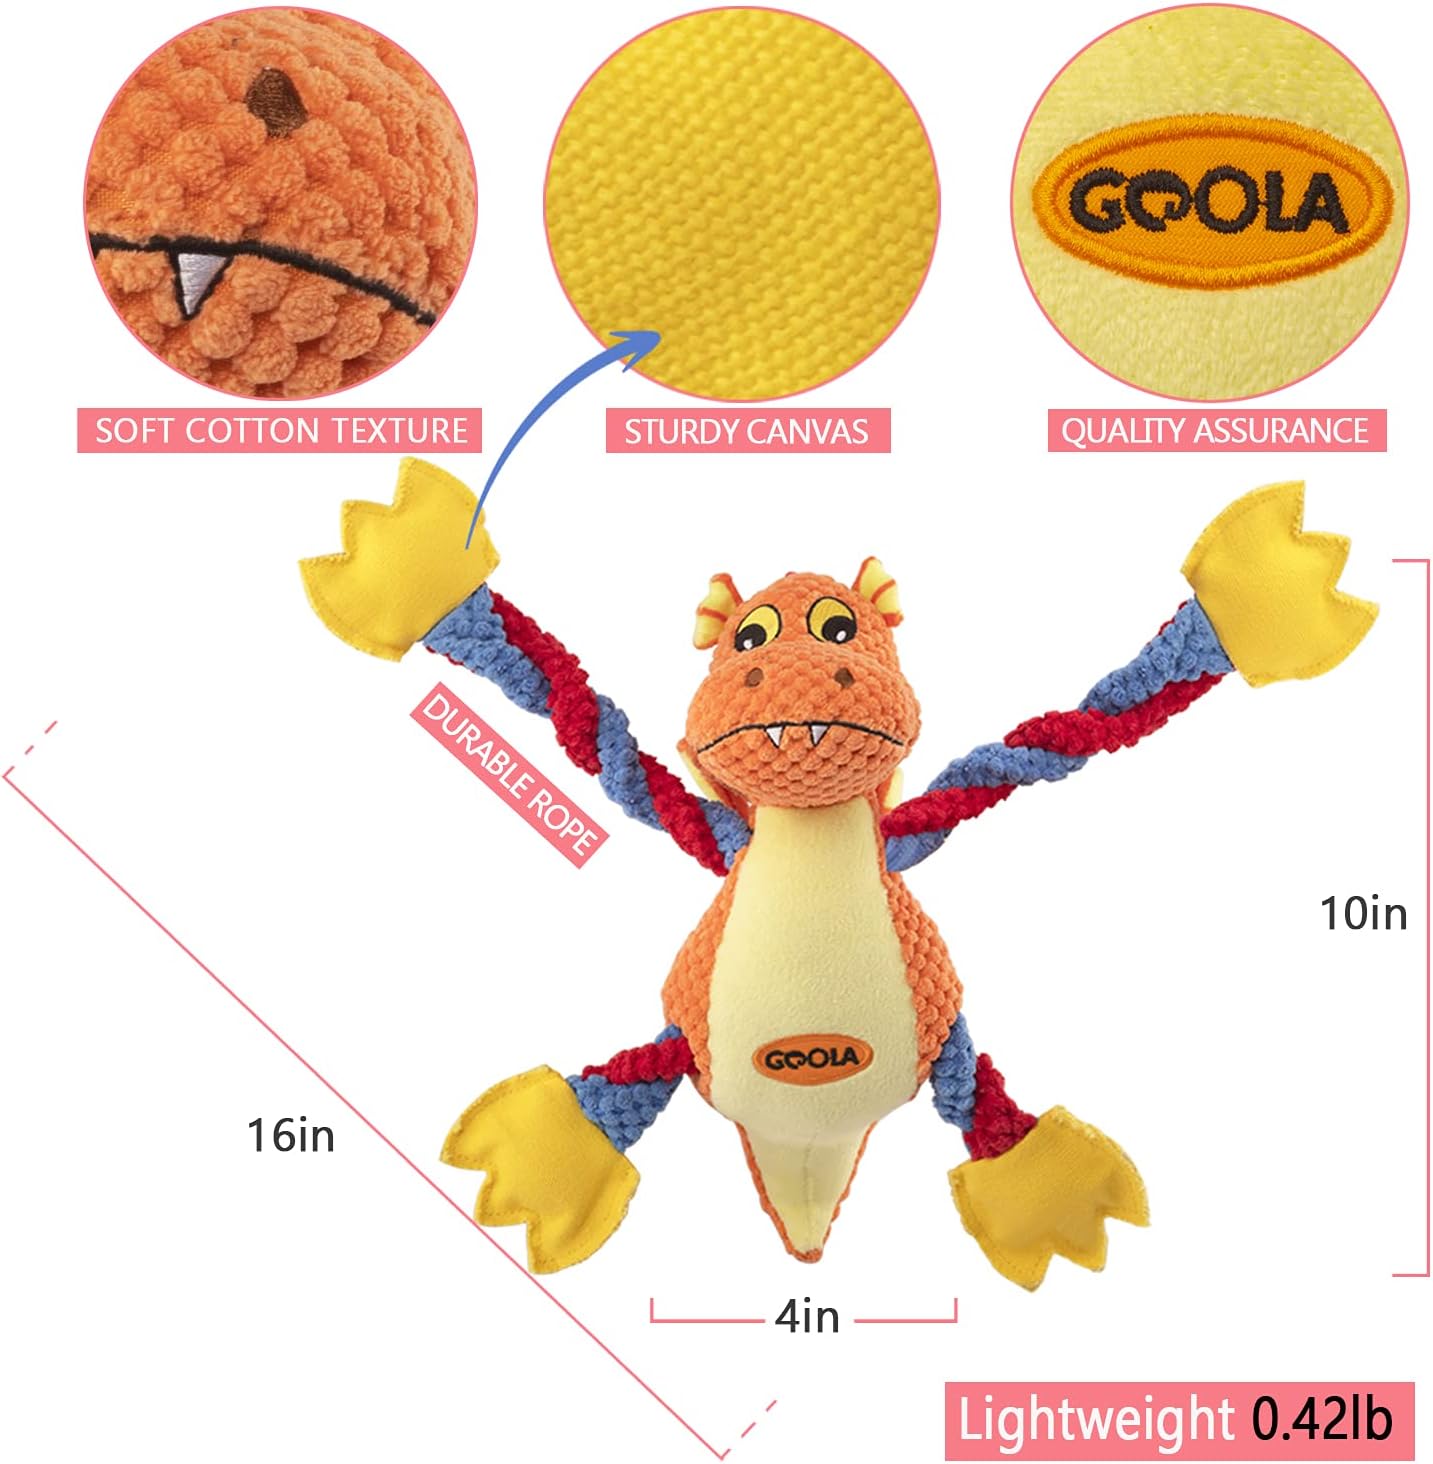 Dog Squeaky Toys, Cute Dragon Interactive Plush Stuffed Toy with 5 Squeakers and Crinkle Paper,Pet Rope Chew Toy for Puppy Small Medium Large Breed Dogs